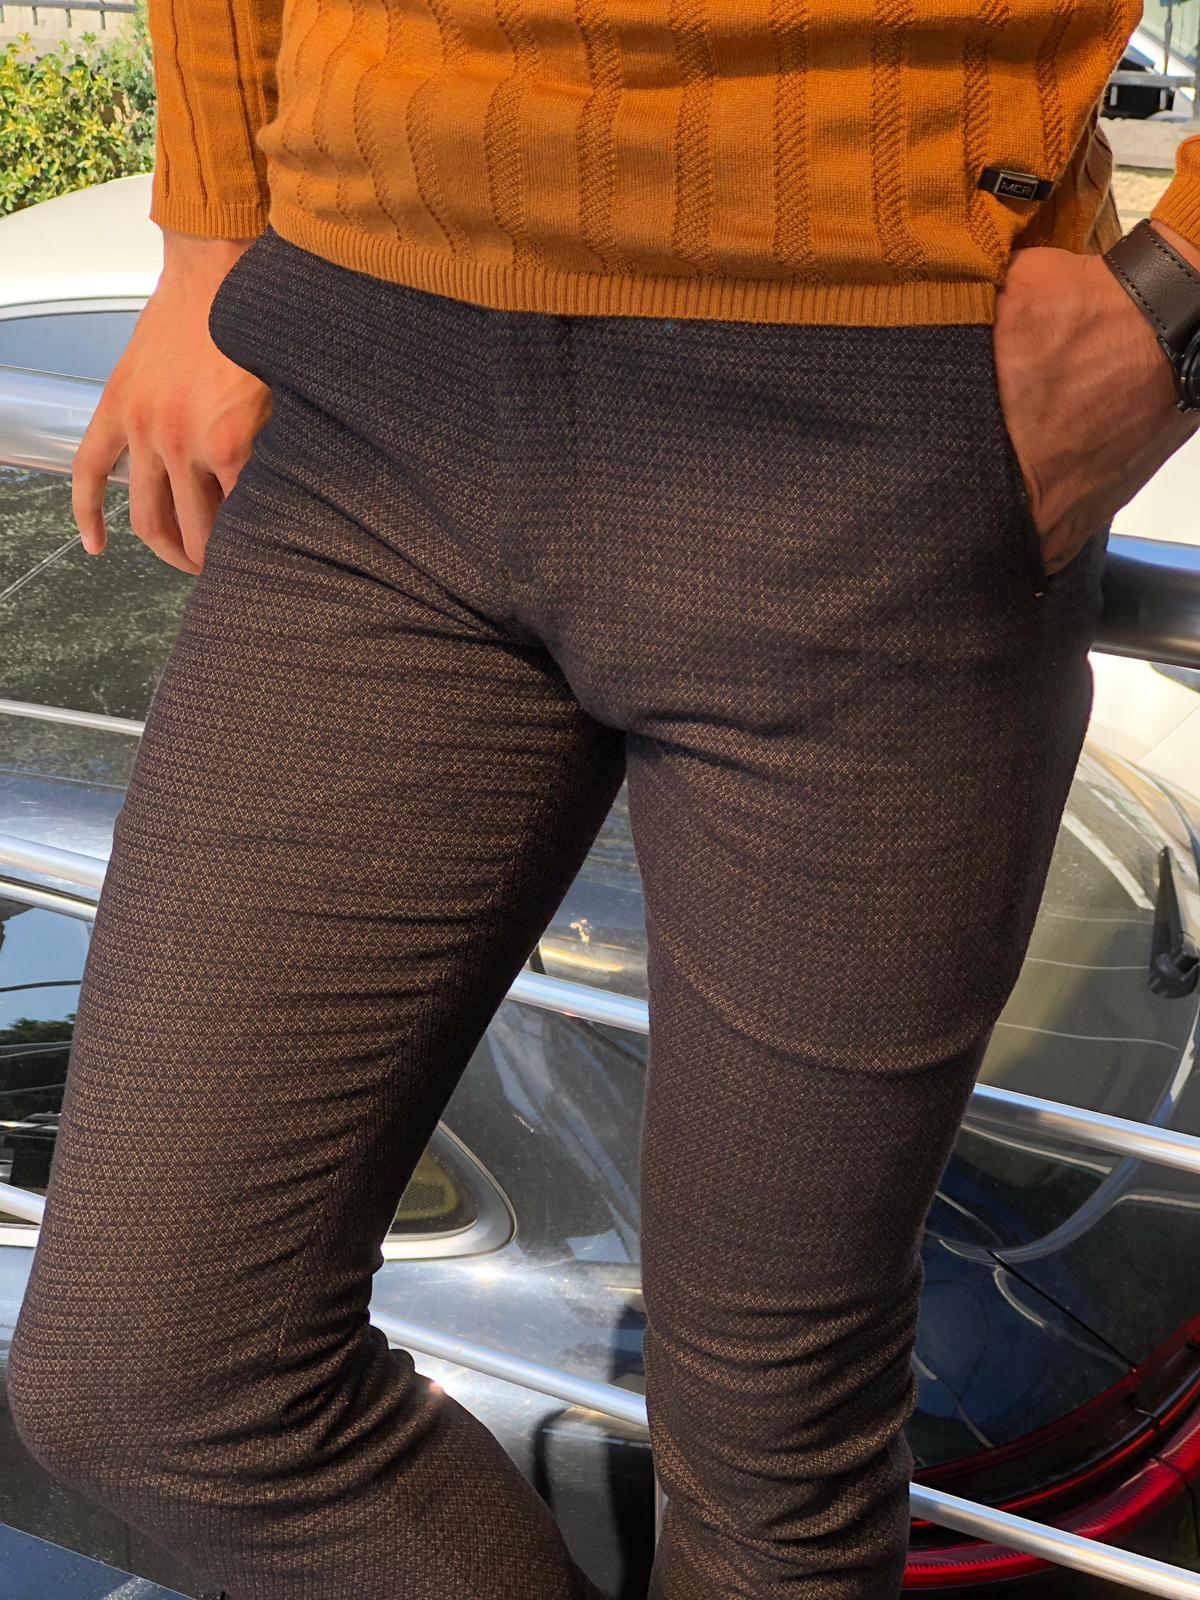 Malacan Slim-fit Patterned Pants Camel